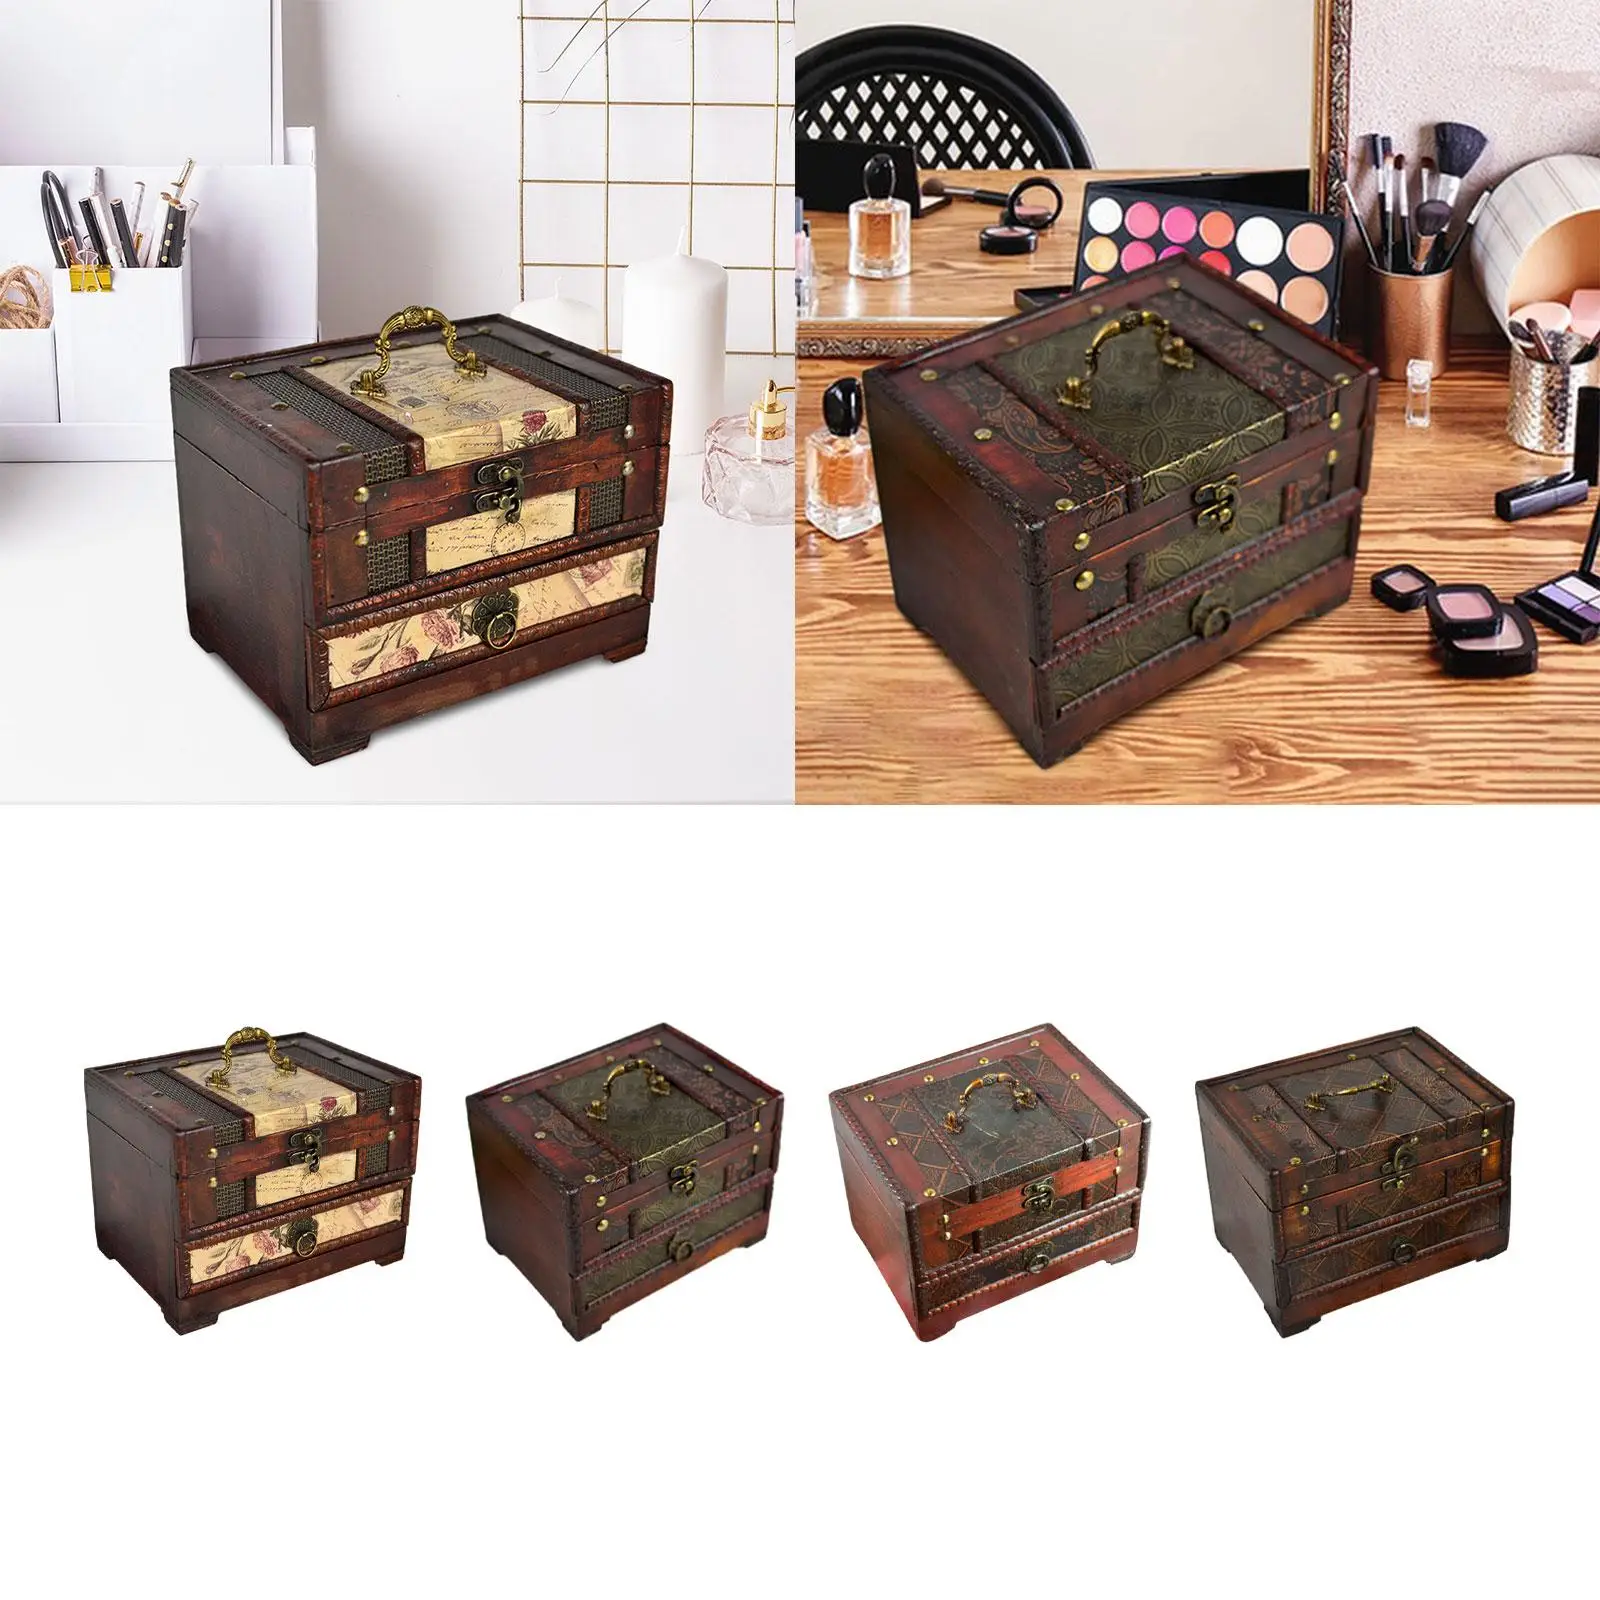 Vintage Wooden Jewelry Box Trinket Container 3 Tier Decorative Storage Box Classical Jewelry Case Holder Retro Jewellery Chest